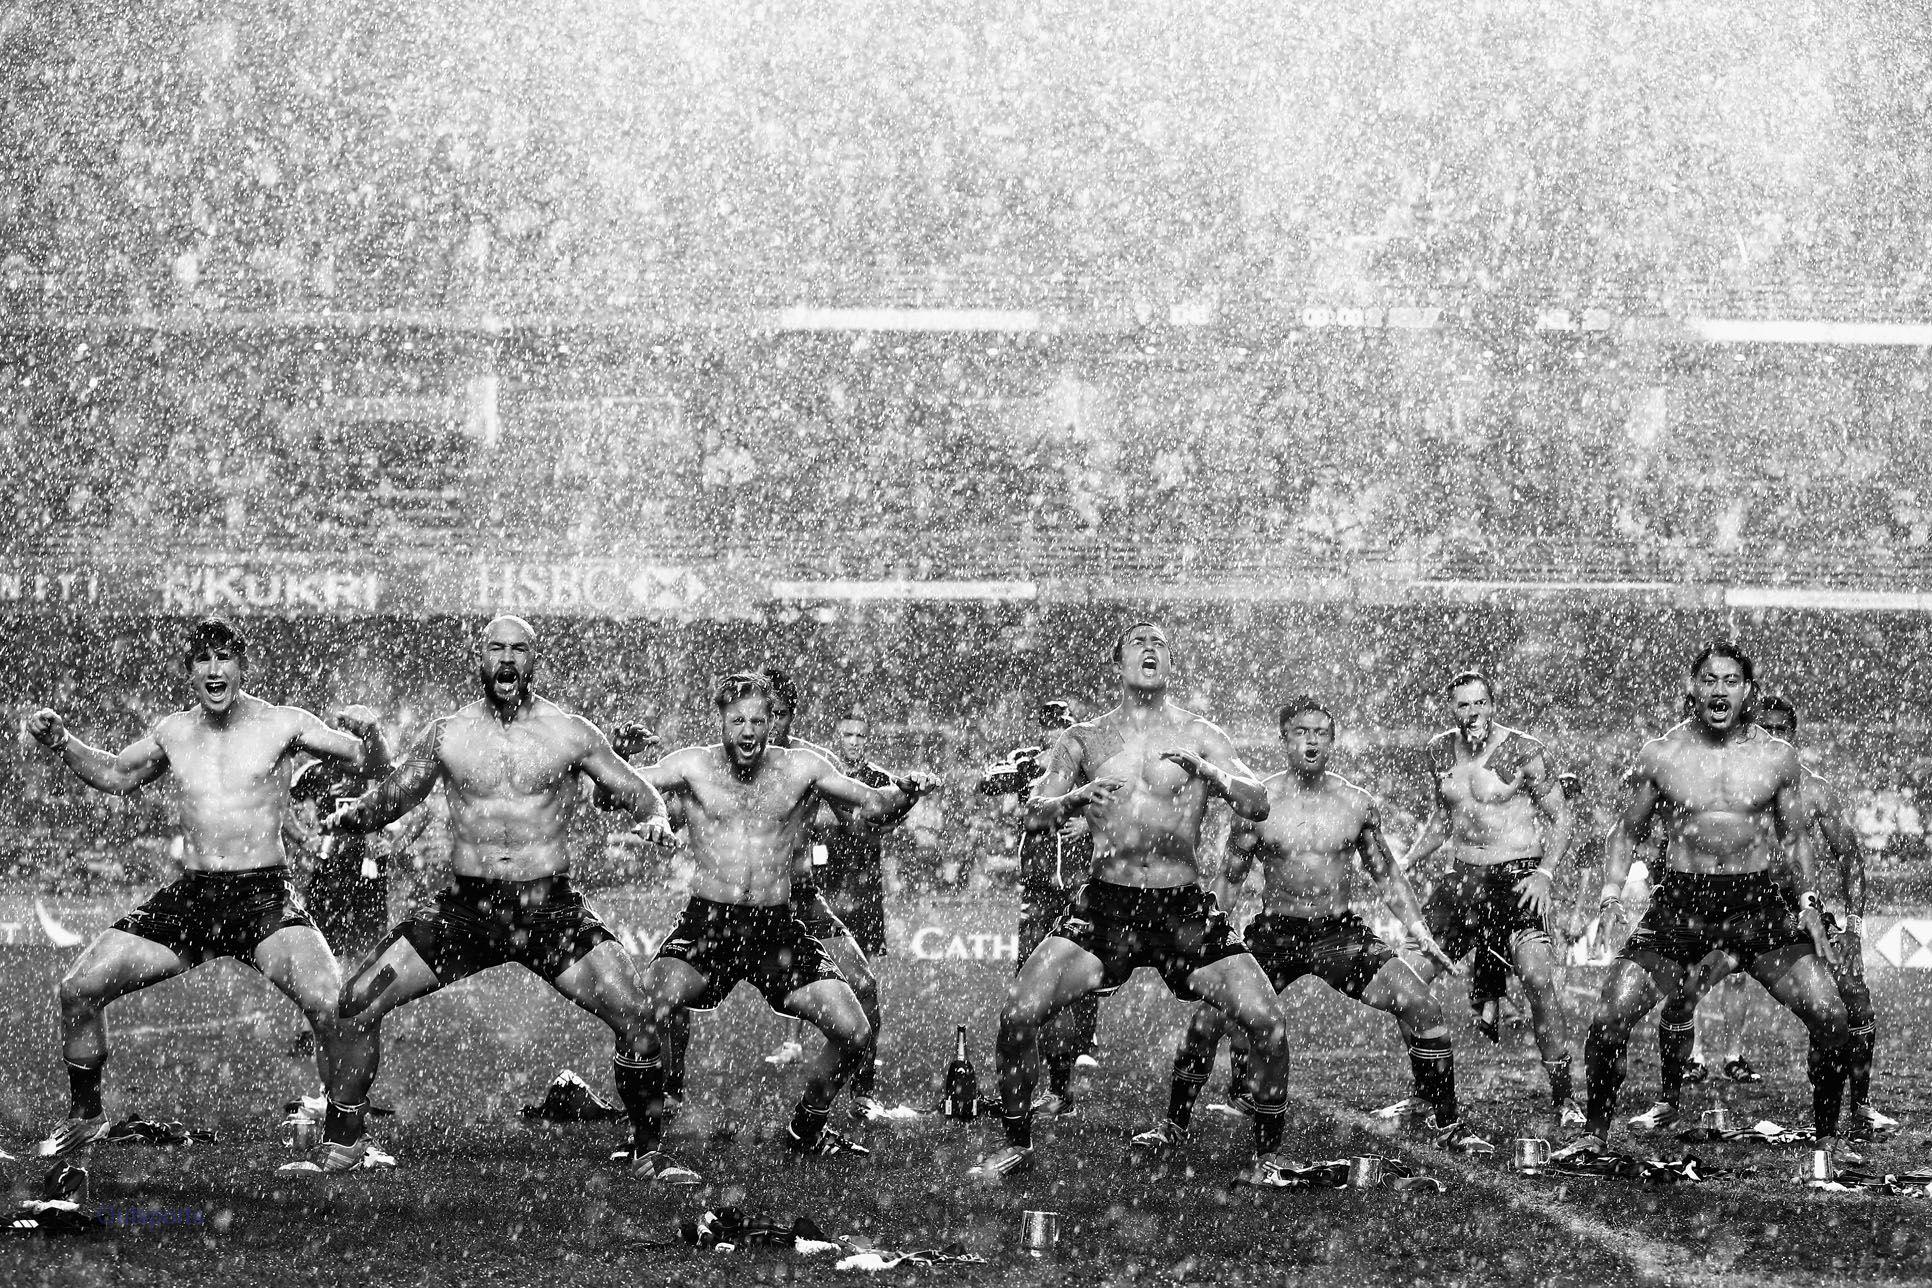 Awesome photo of New Zealand rugby players doing shirtless haka